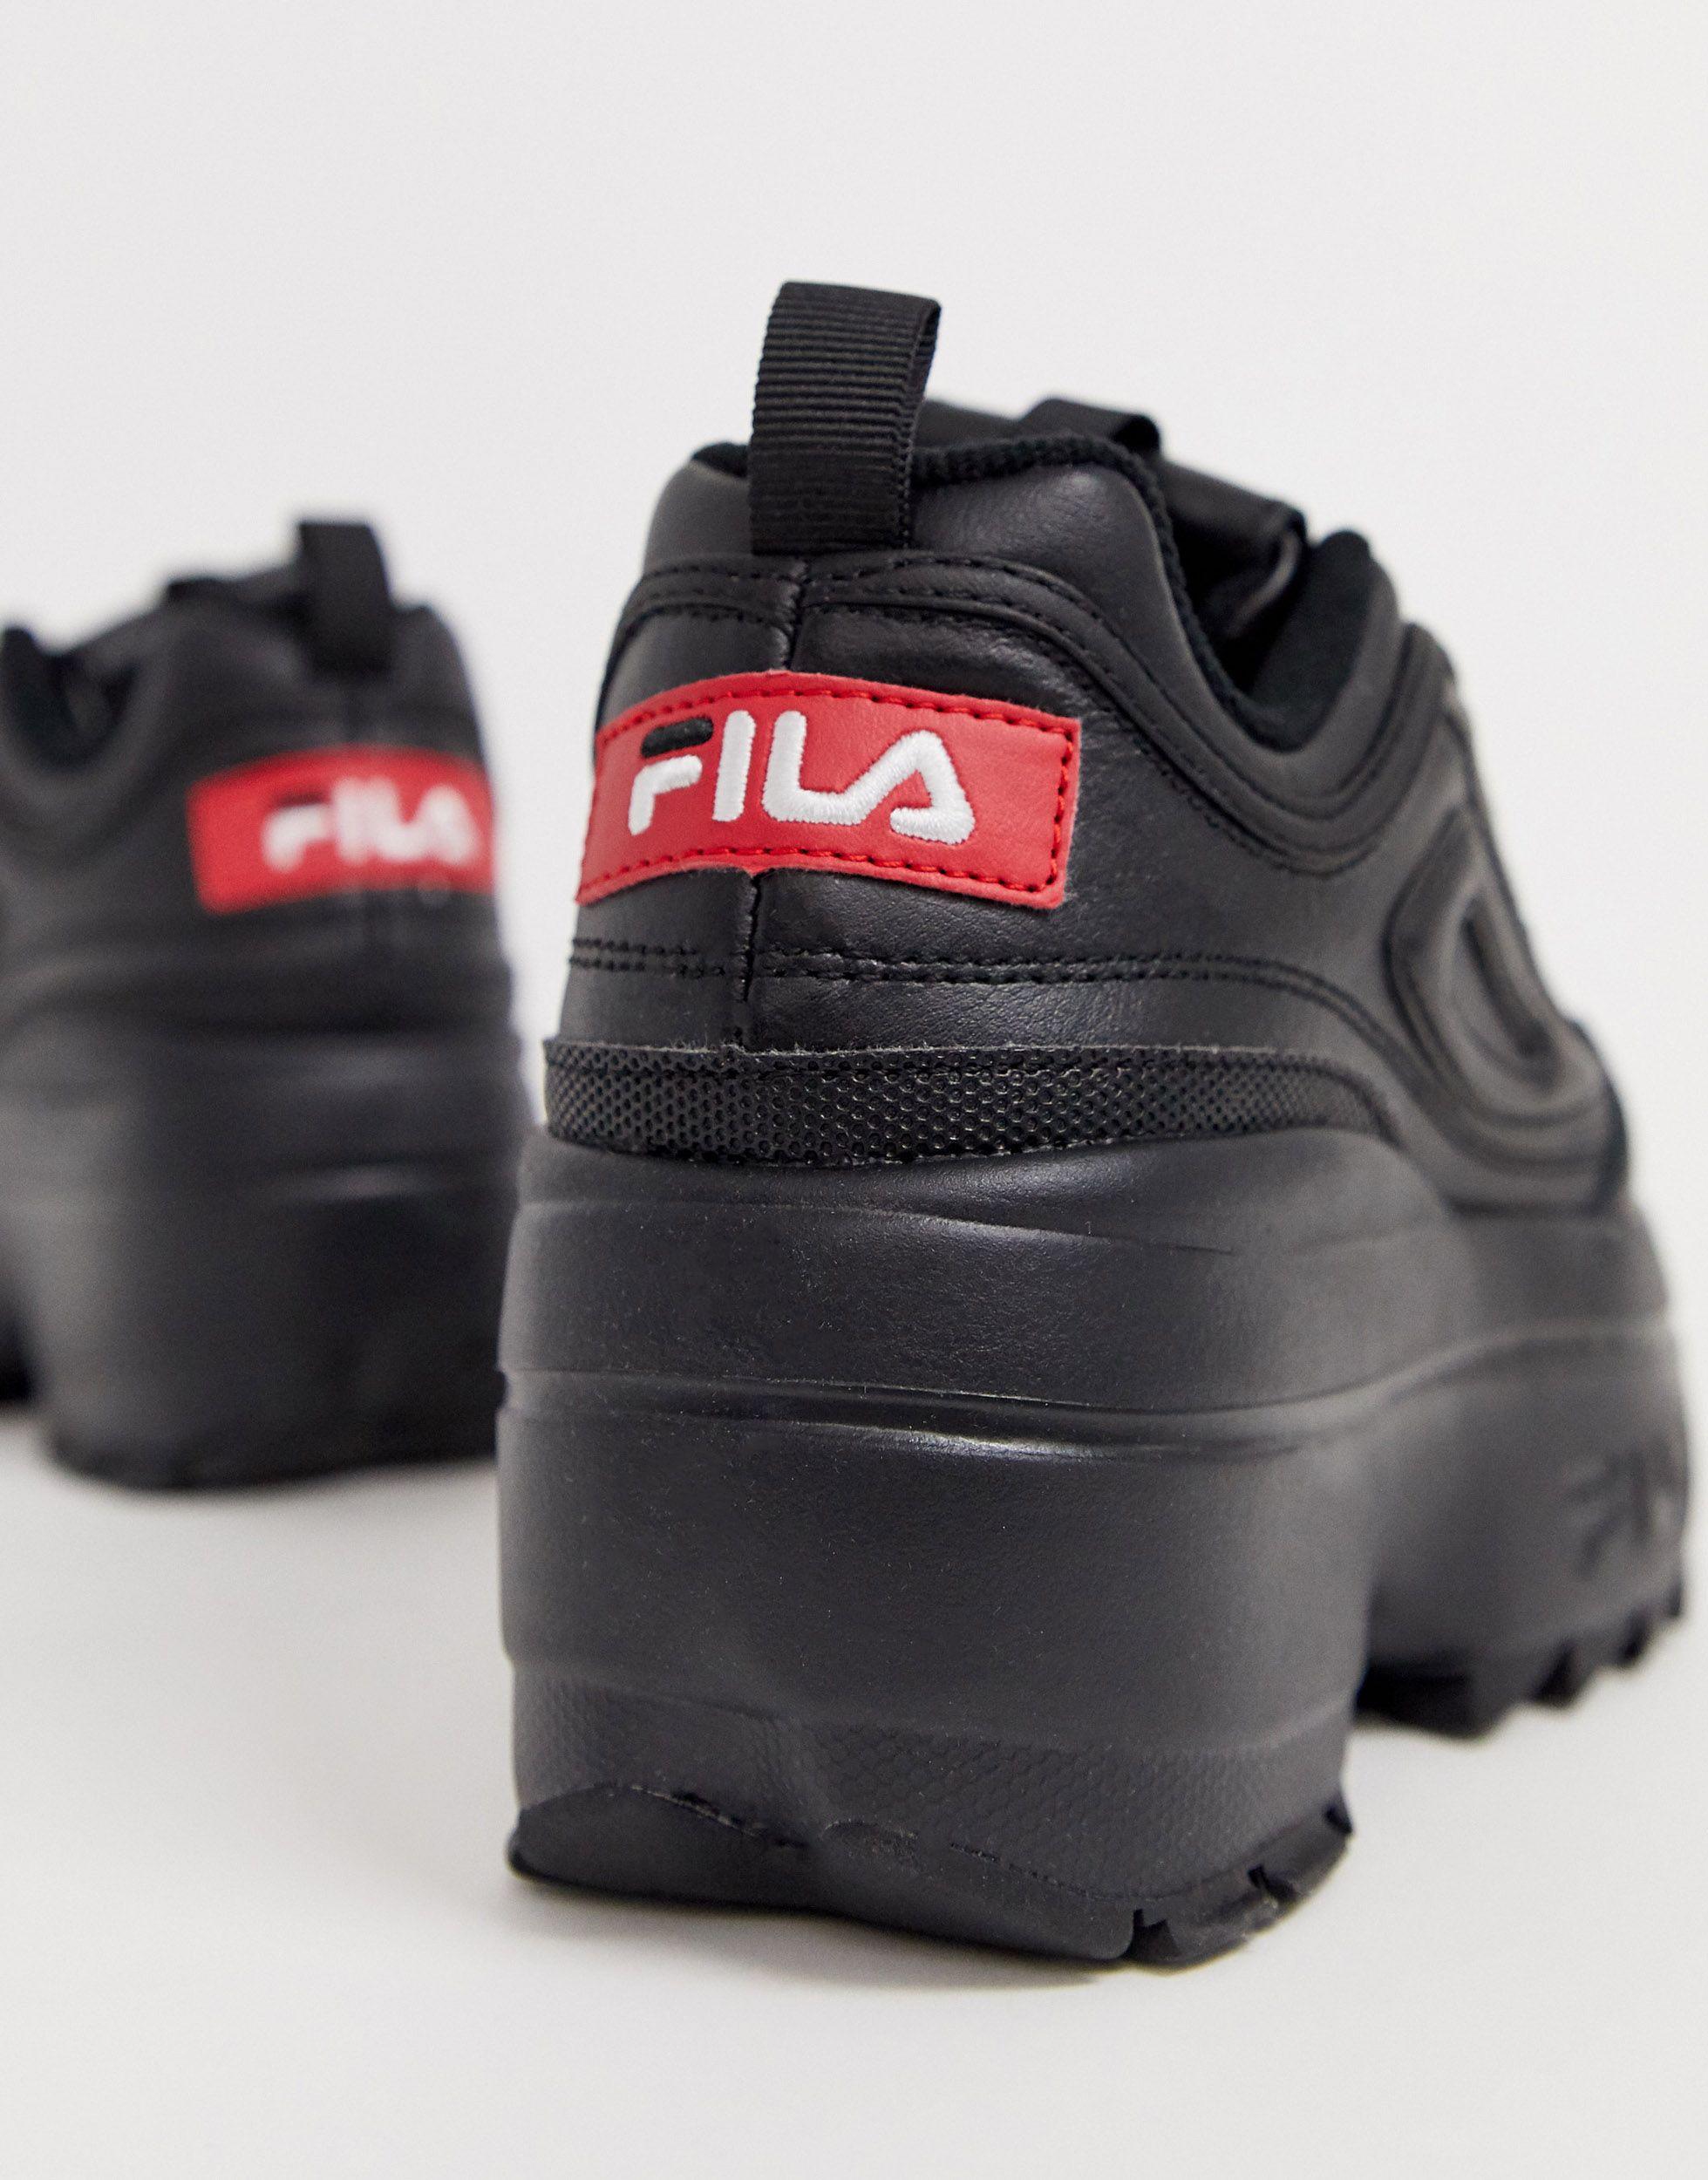 fila compensee, great discount Hit A 66% Discount - simourdesign.com